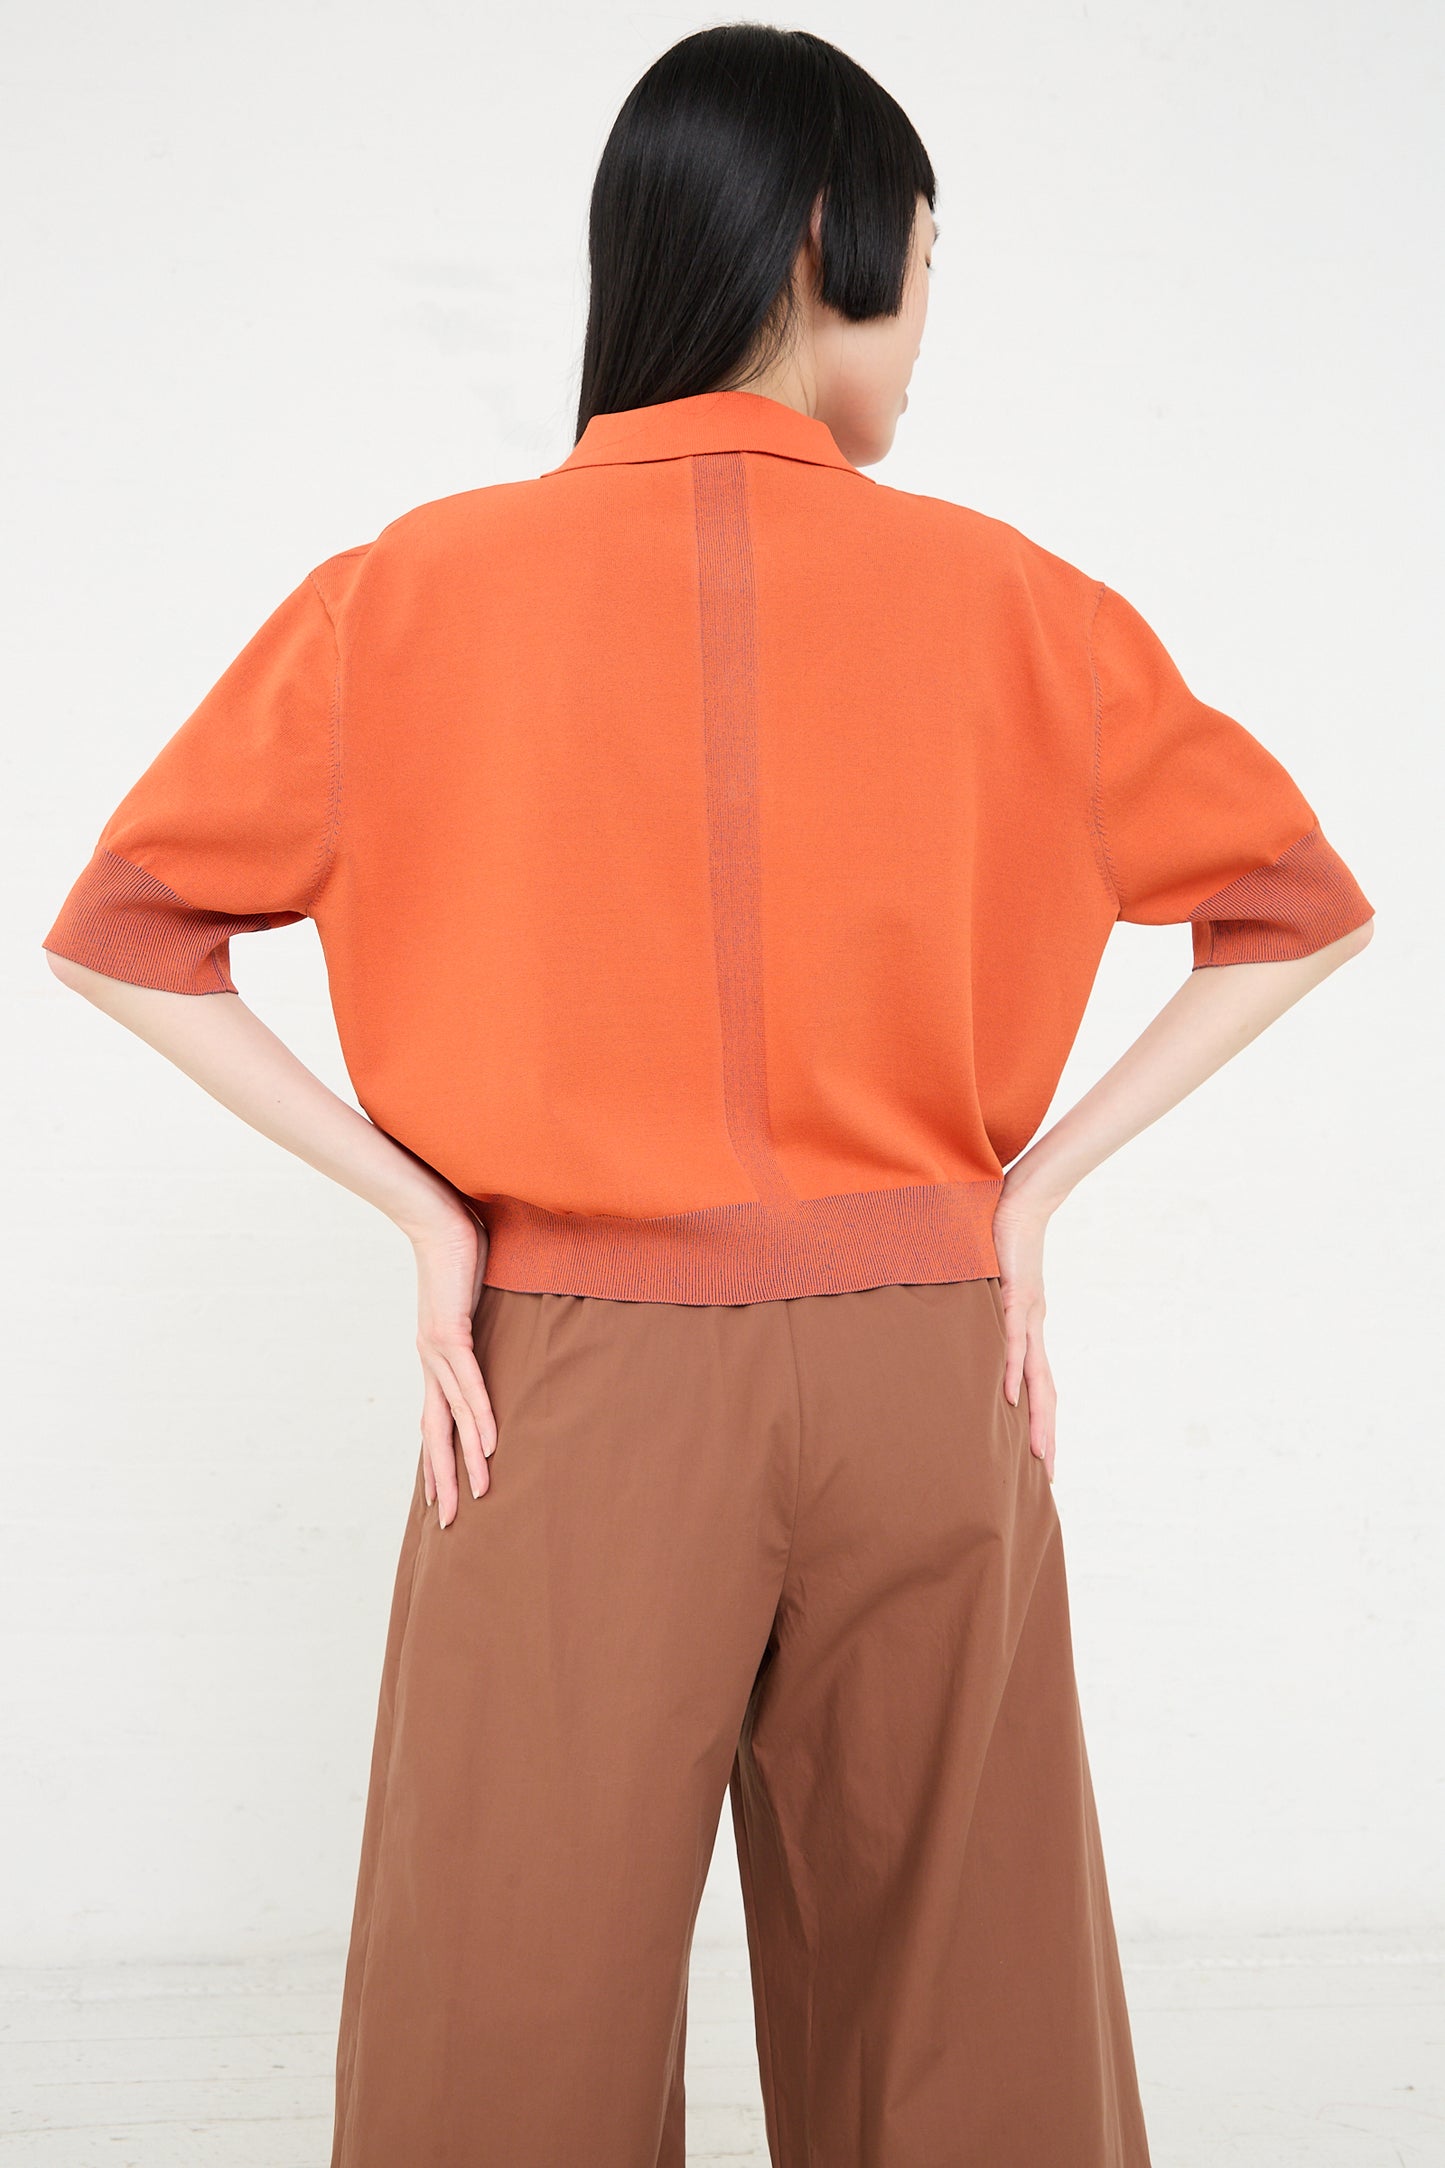 A woman seen from the back wearing a Rachel Comey Omin Top in Orange and brown trousers.